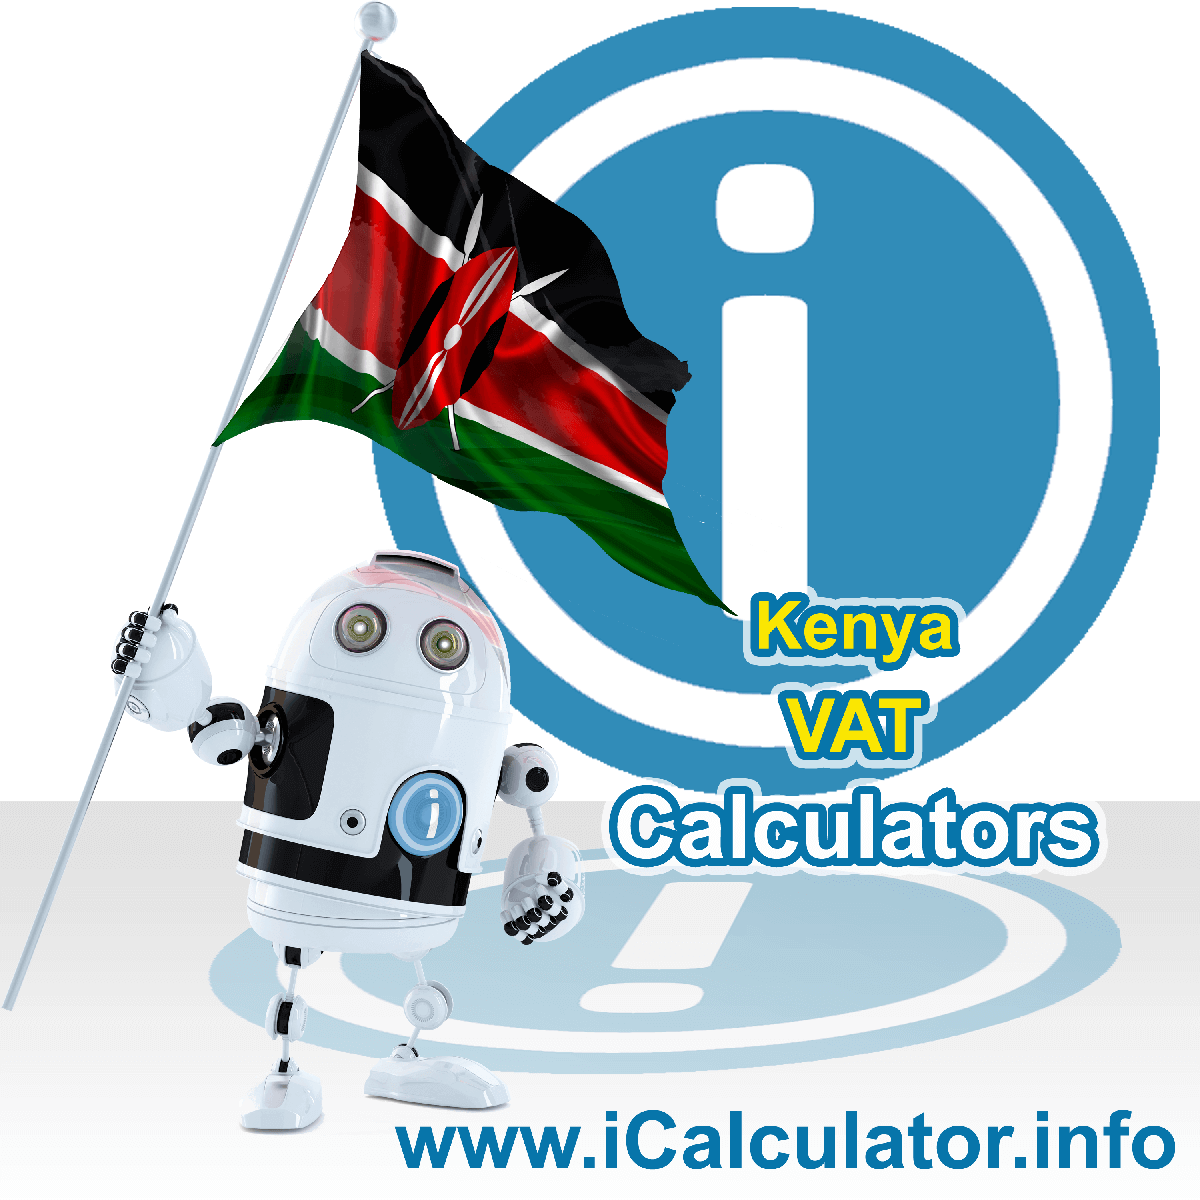 Kenya VAT Calculator. This image shows the Kenya flag and information relating to the VAT formula used for calculating Value Added Tax in Kenya using the Kenya VAT Calculator in 2023